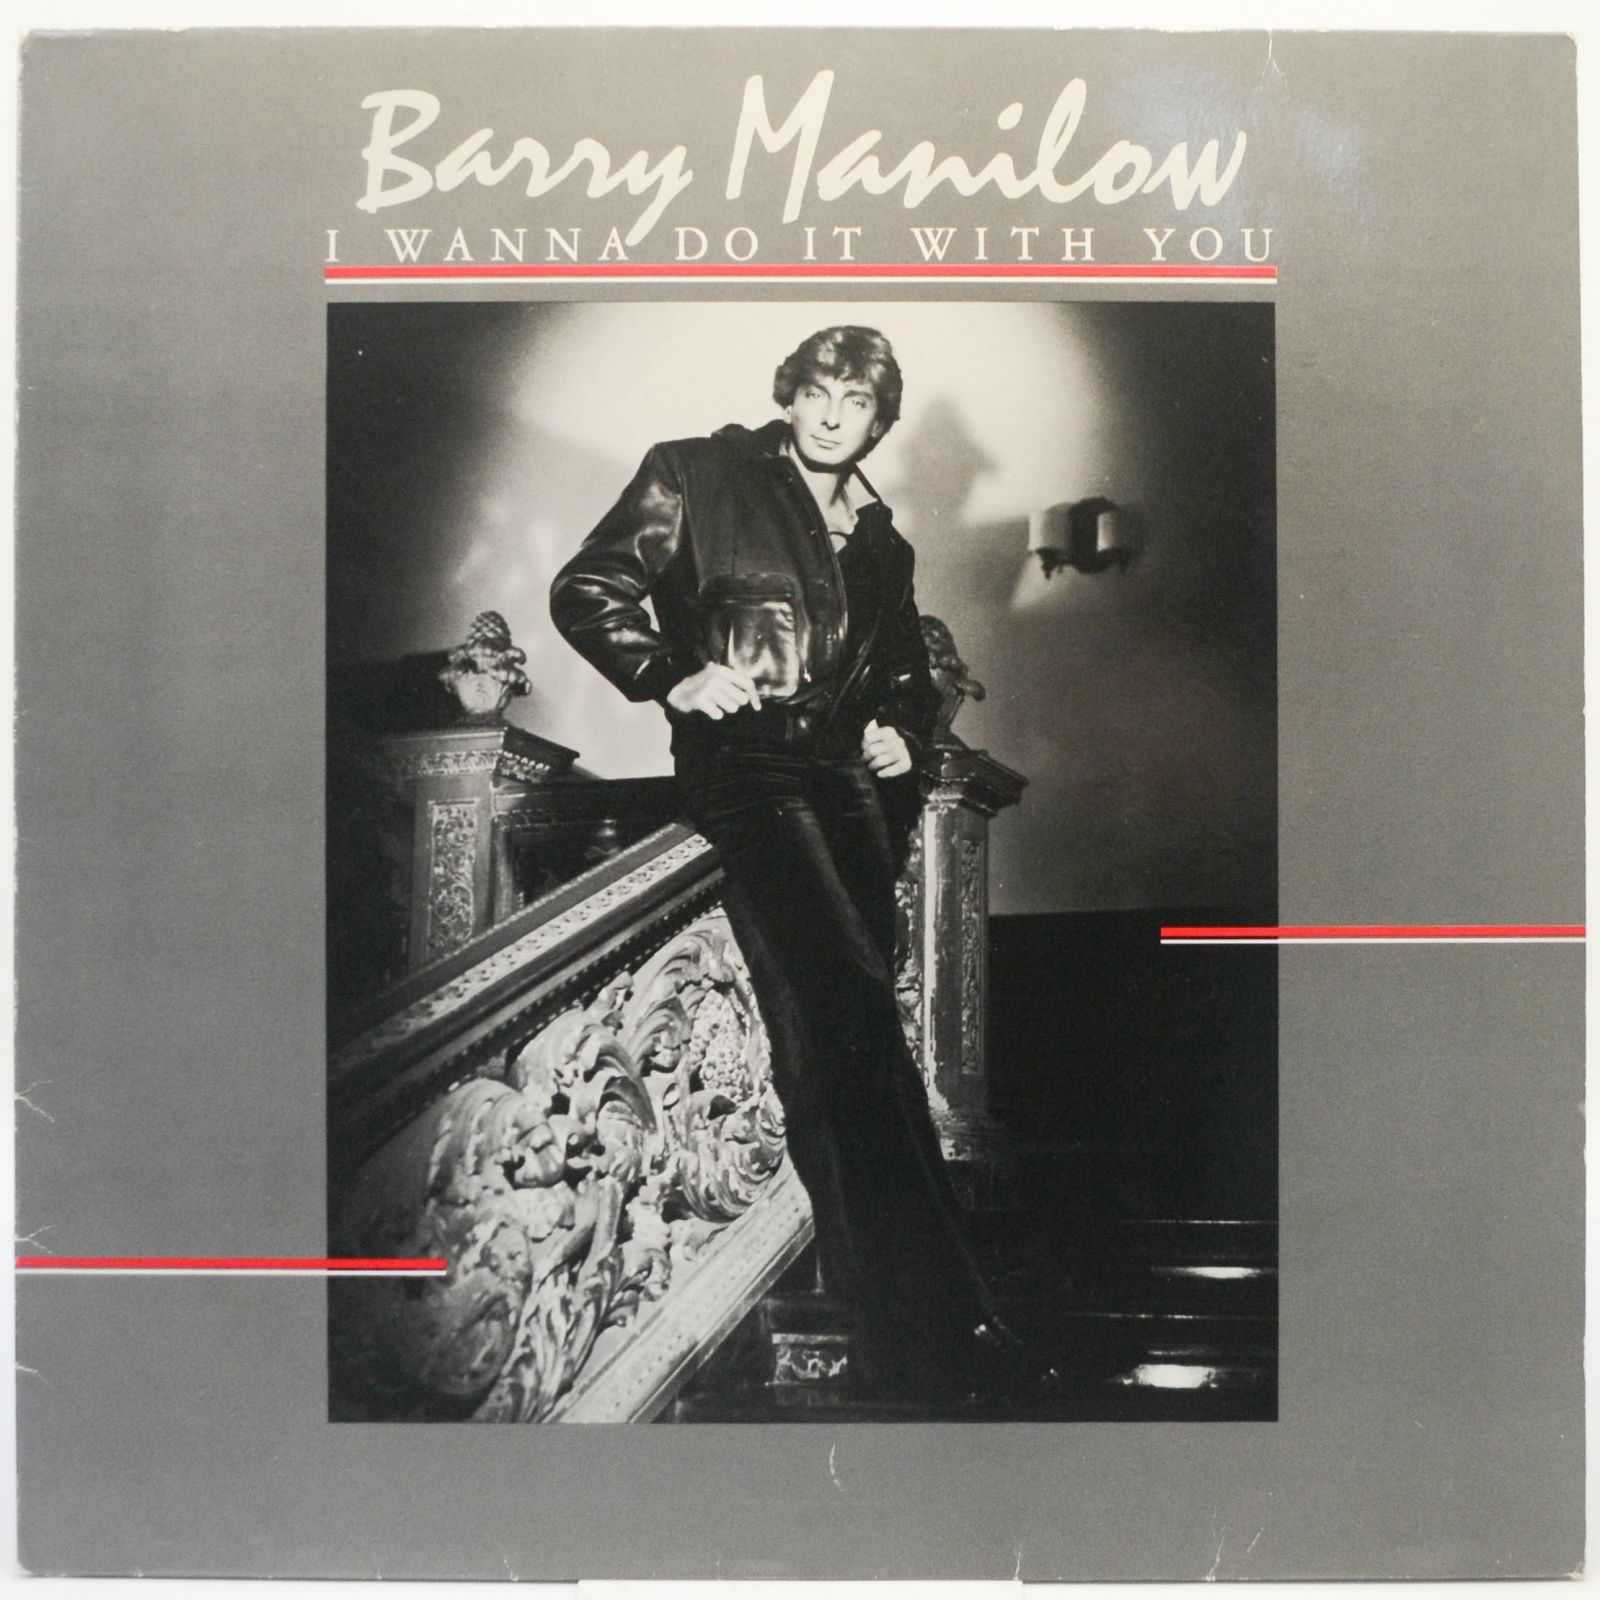 Barry Manilow — I Wanna Do It With You, 1982